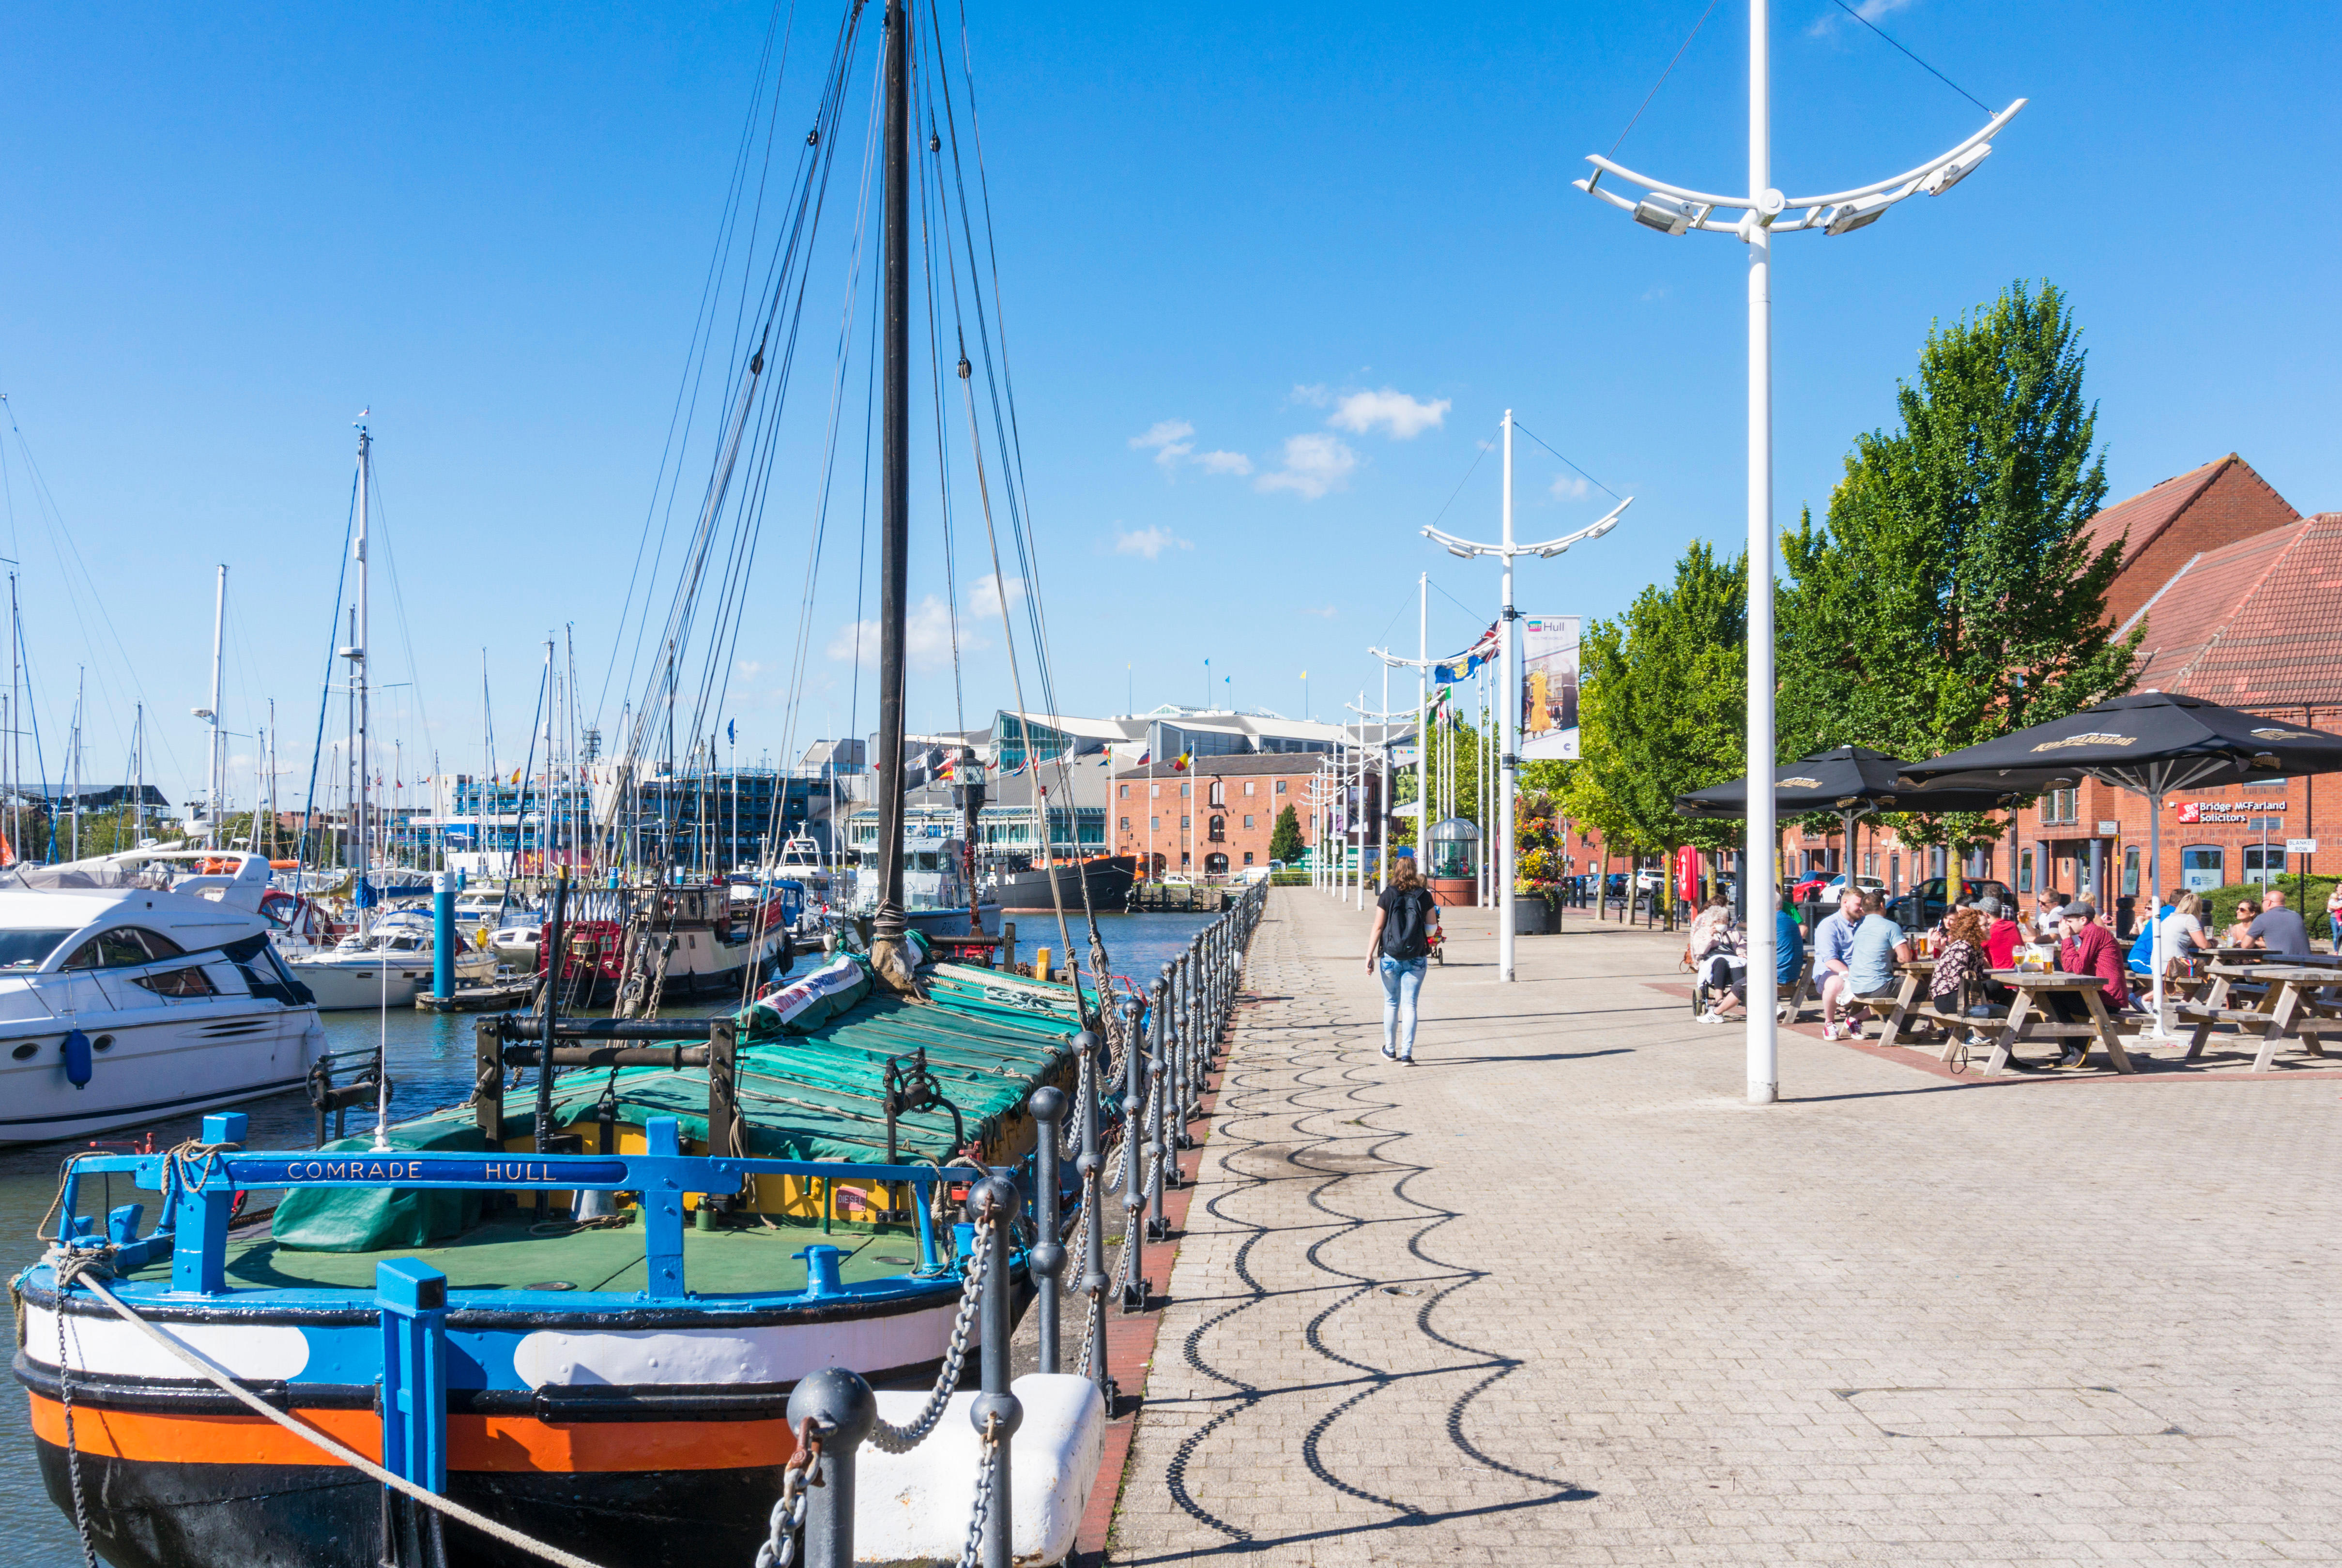 Hull's marina is lined with bars, cafes and independent shops